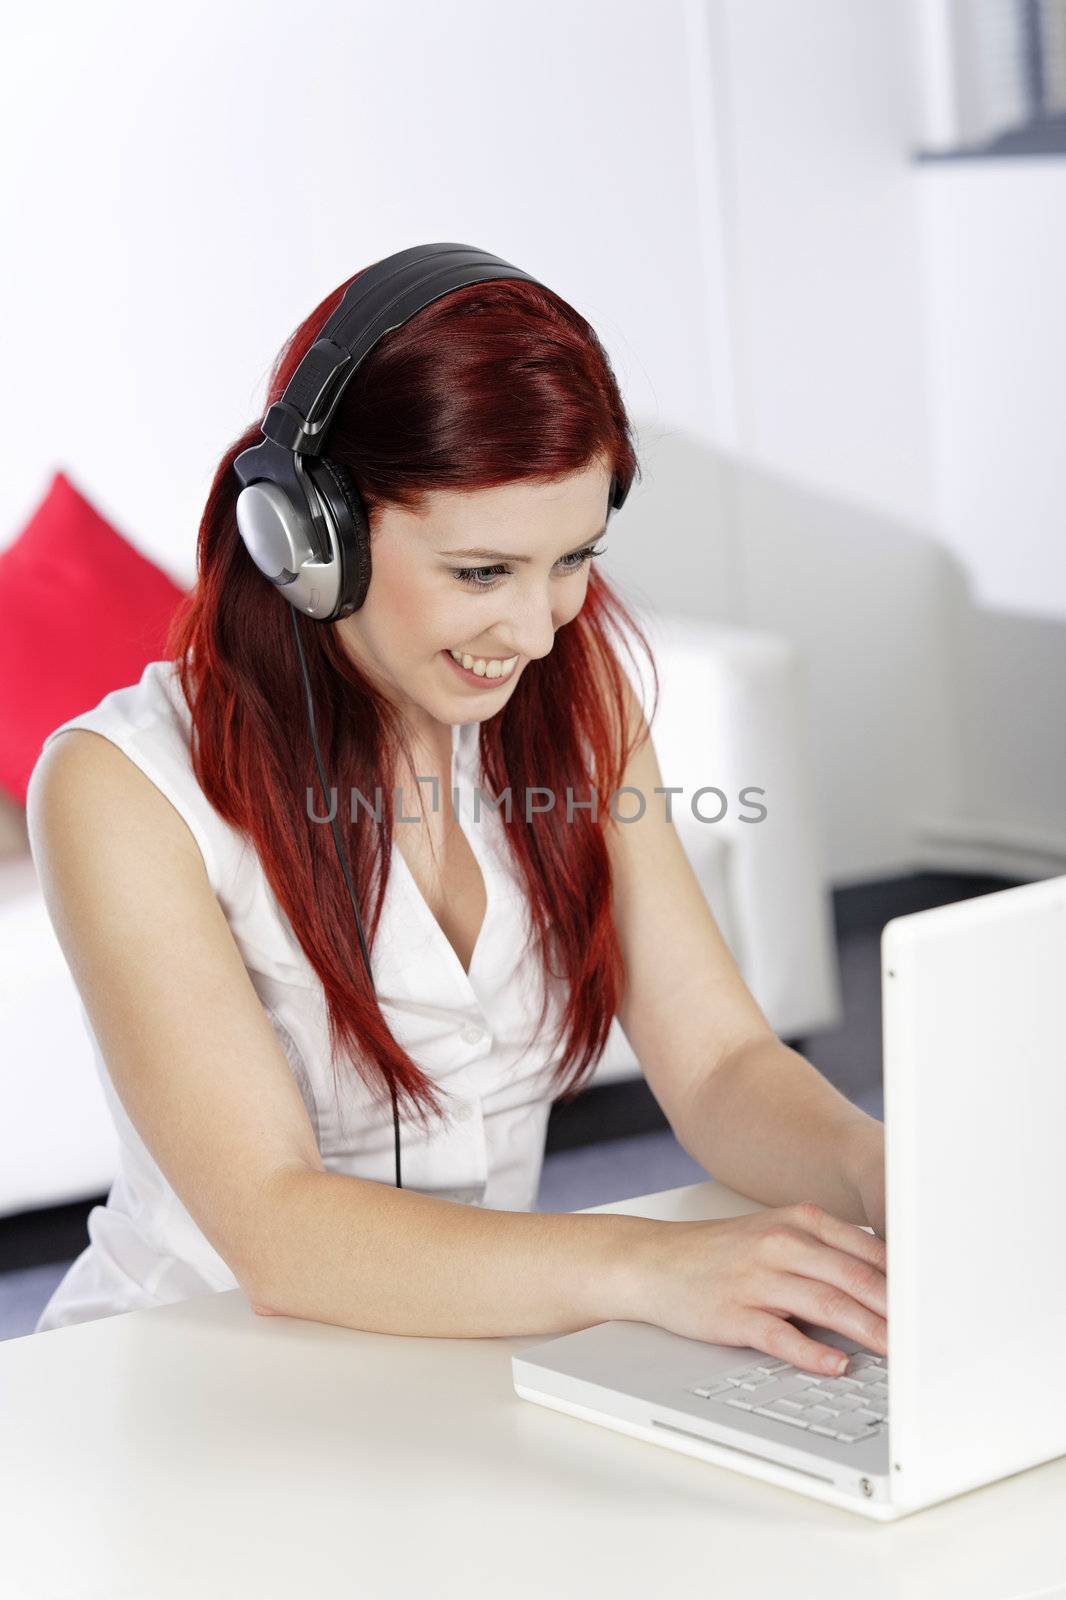 Beautiful woman working on laptop listening to music on her heaphones